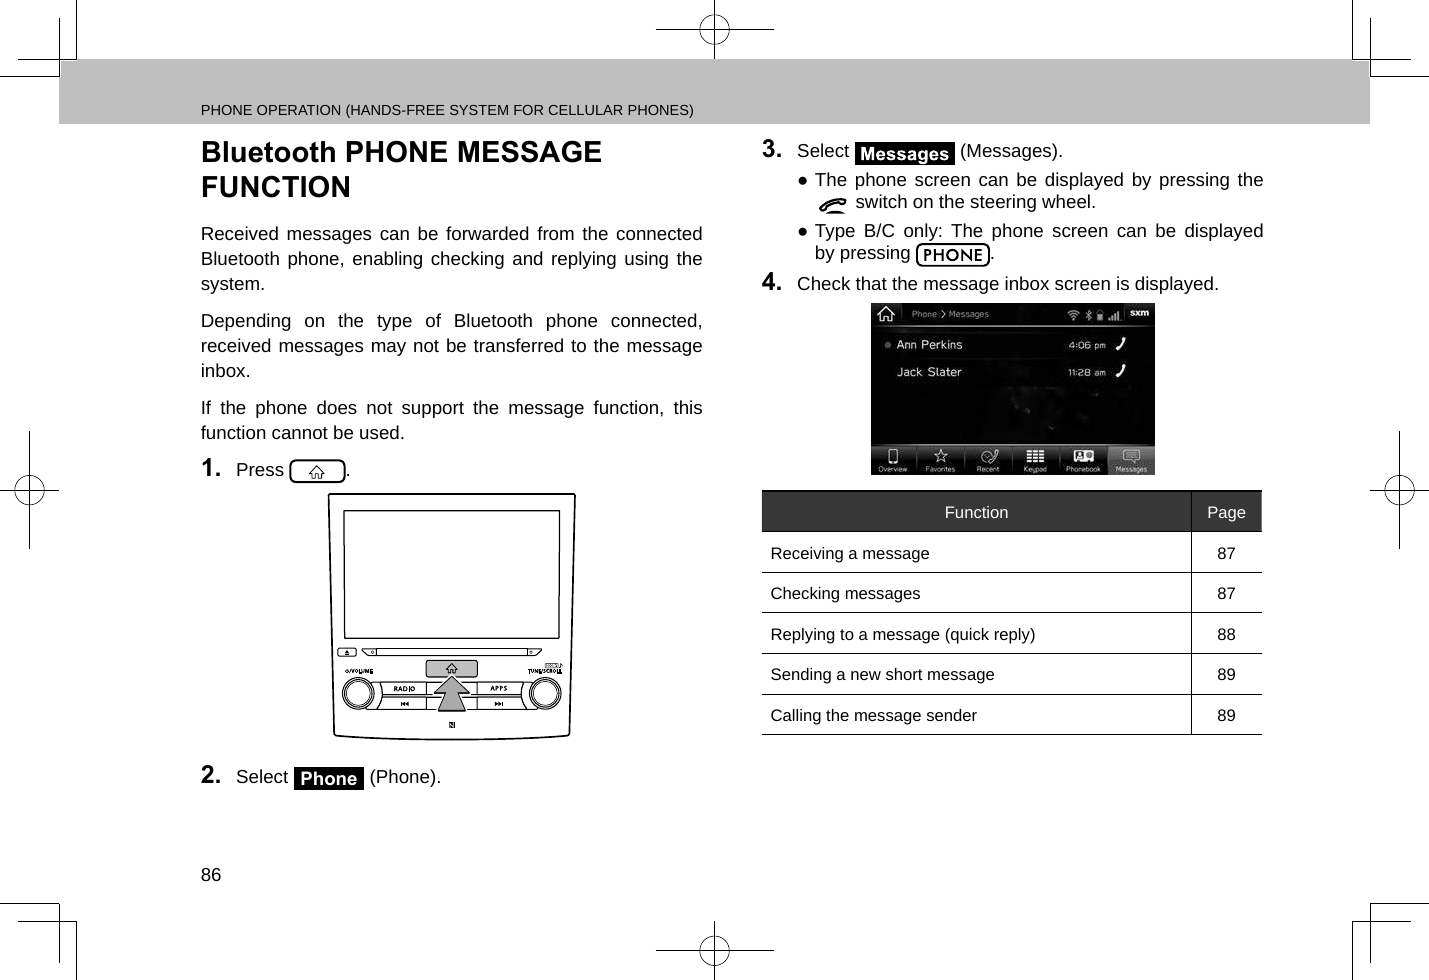 PHONE OPERATION (HANDS-FREE SYSTEM FOR CELLULAR PHONES)86Bluetooth PHONE MESSAGE FUNCTIONReceived messages can be forwarded from the connected Bluetooth phone, enabling checking and replying using the system.Depending on the type of Bluetooth phone connected, received messages may not be transferred to the message inbox.If the phone does not support the message function, this function cannot be used.1.  Press  .2.  Select Phone (Phone).3.  Select   (Messages). ●The phone screen can be displayed by pressing the  switch on the steering wheel. ●Type B/C only: The phone screen can be displayed by pressing  .4.  Check that the message inbox screen is displayed.Function PageReceiving a message 87Checking messages 87Replying to a message (quick reply) 88Sending a new short message 89Calling the message sender 89